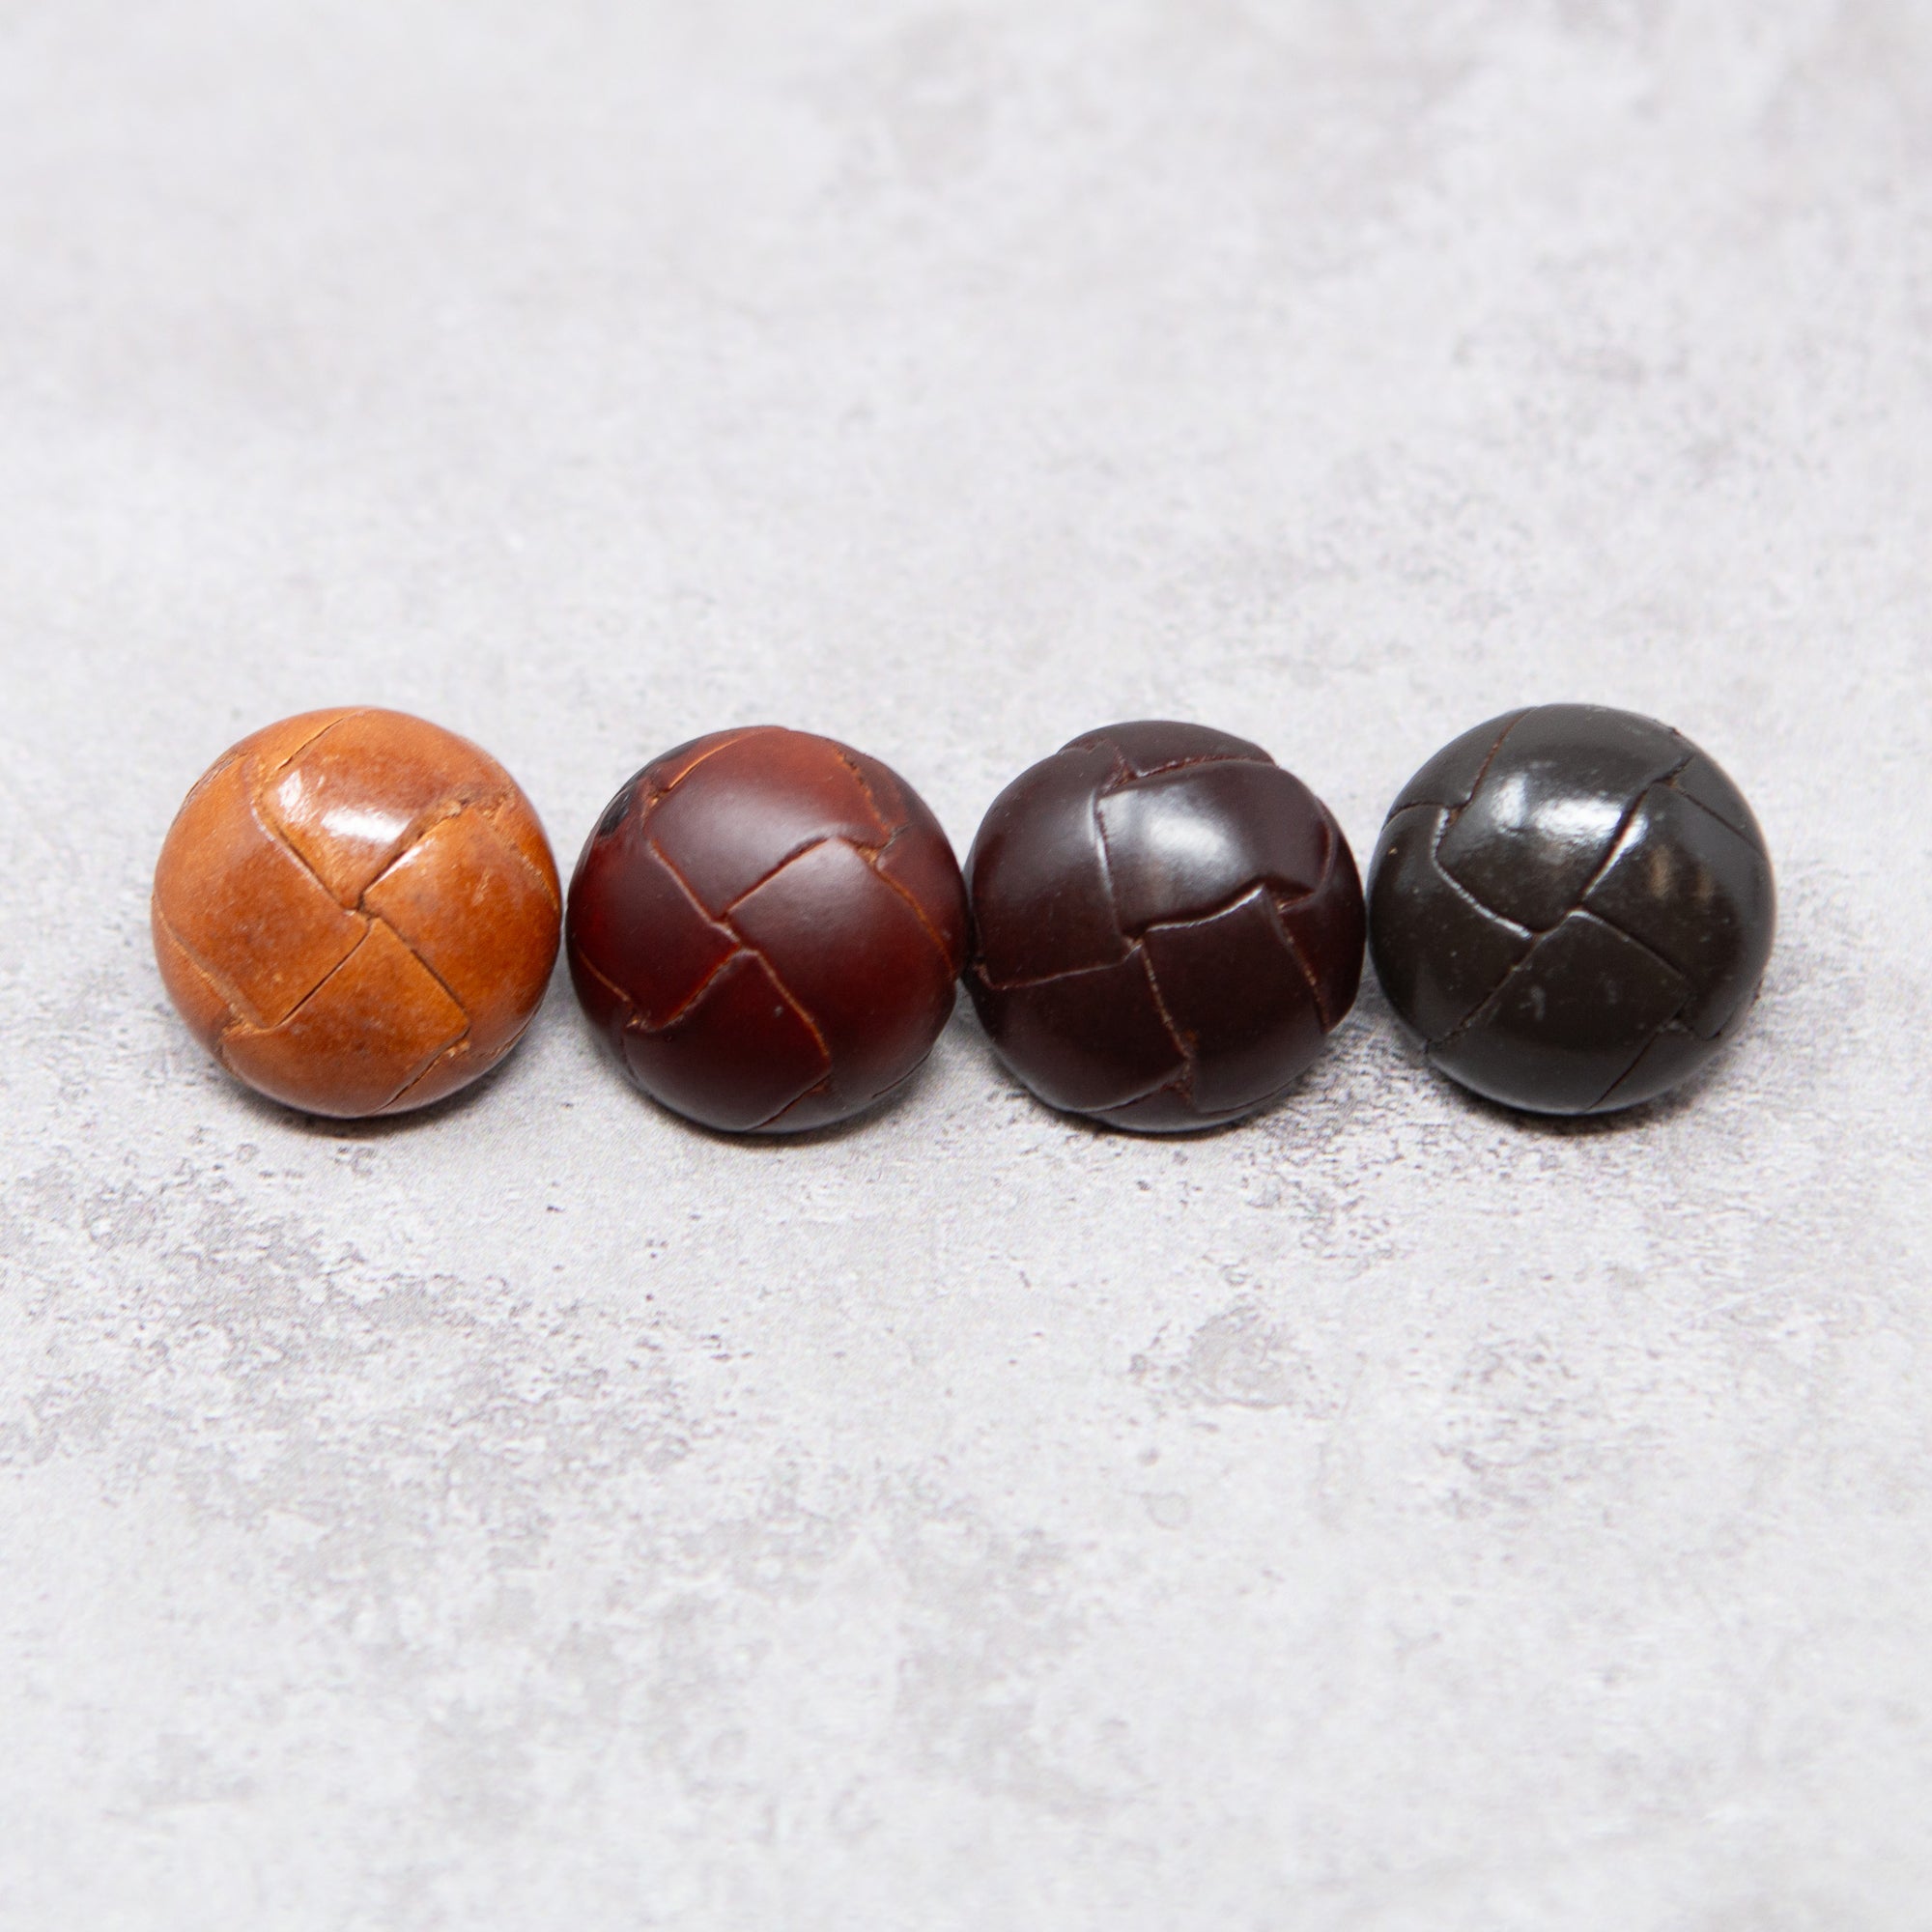 Flat Woven Leather Buttons